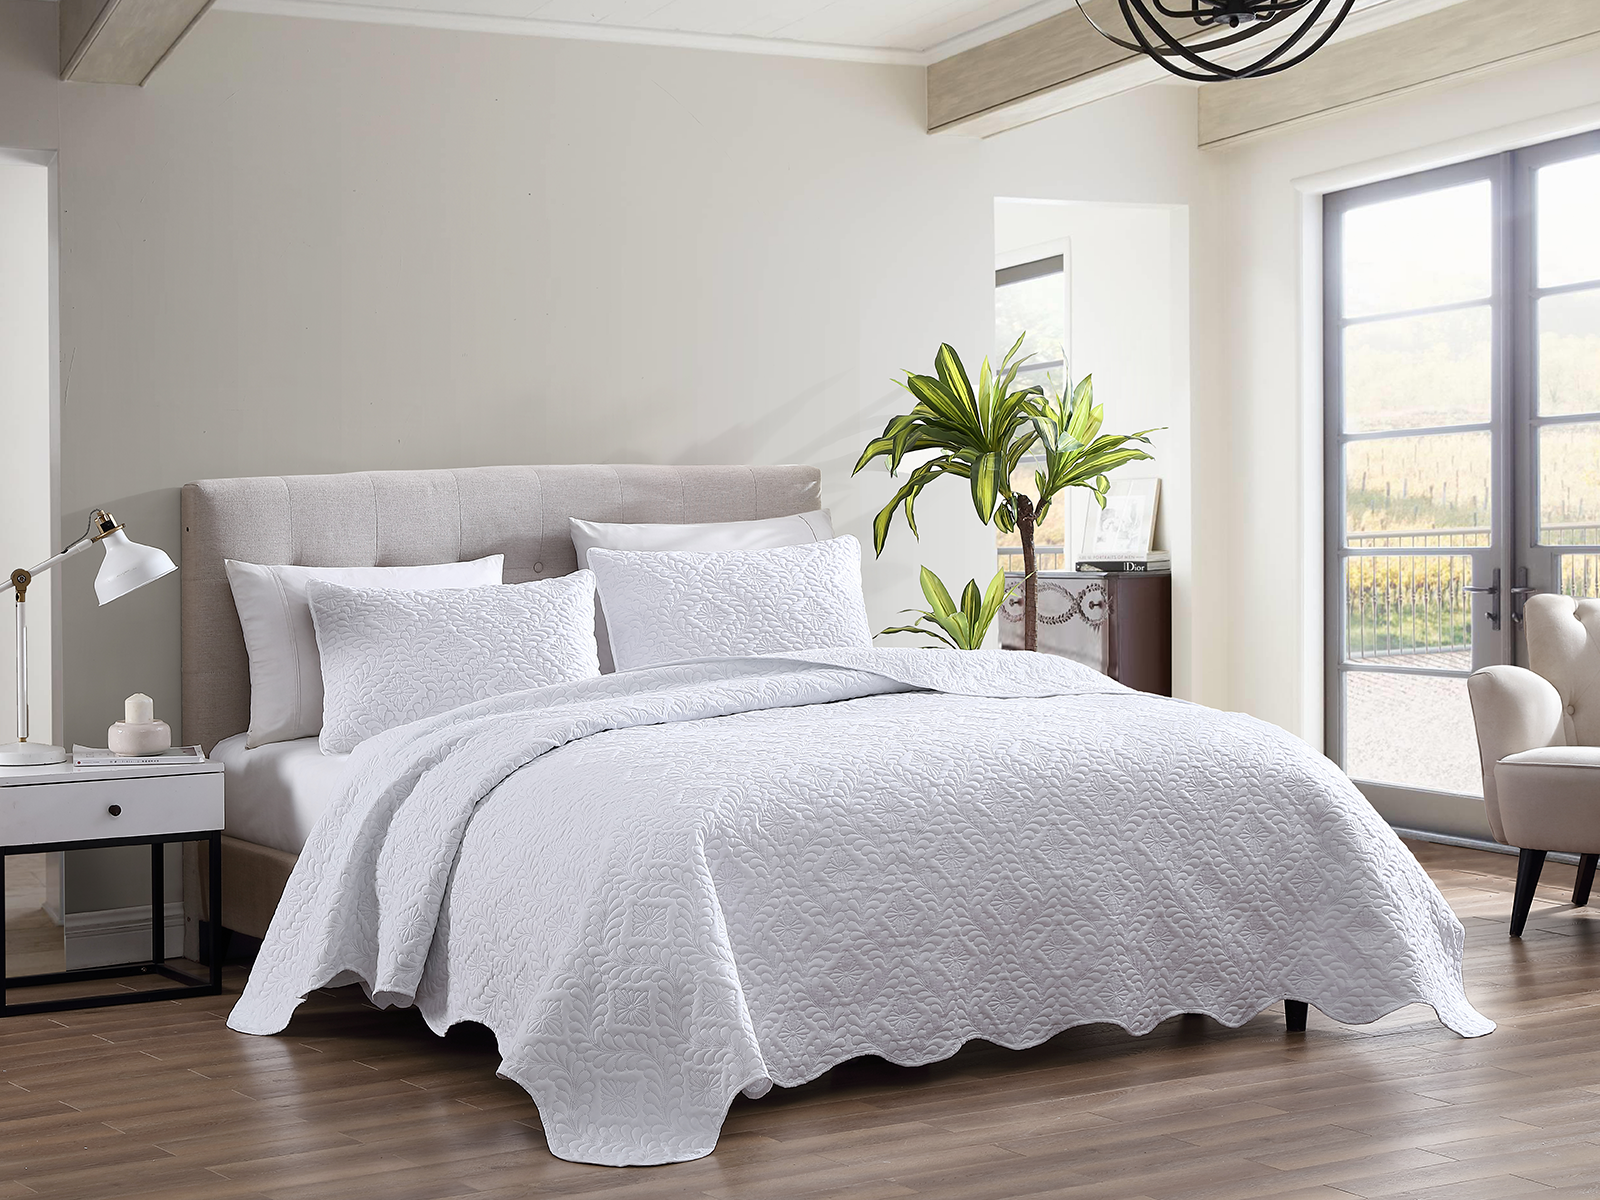 The Nesting Company Queen Ivy Bedspread Set | White